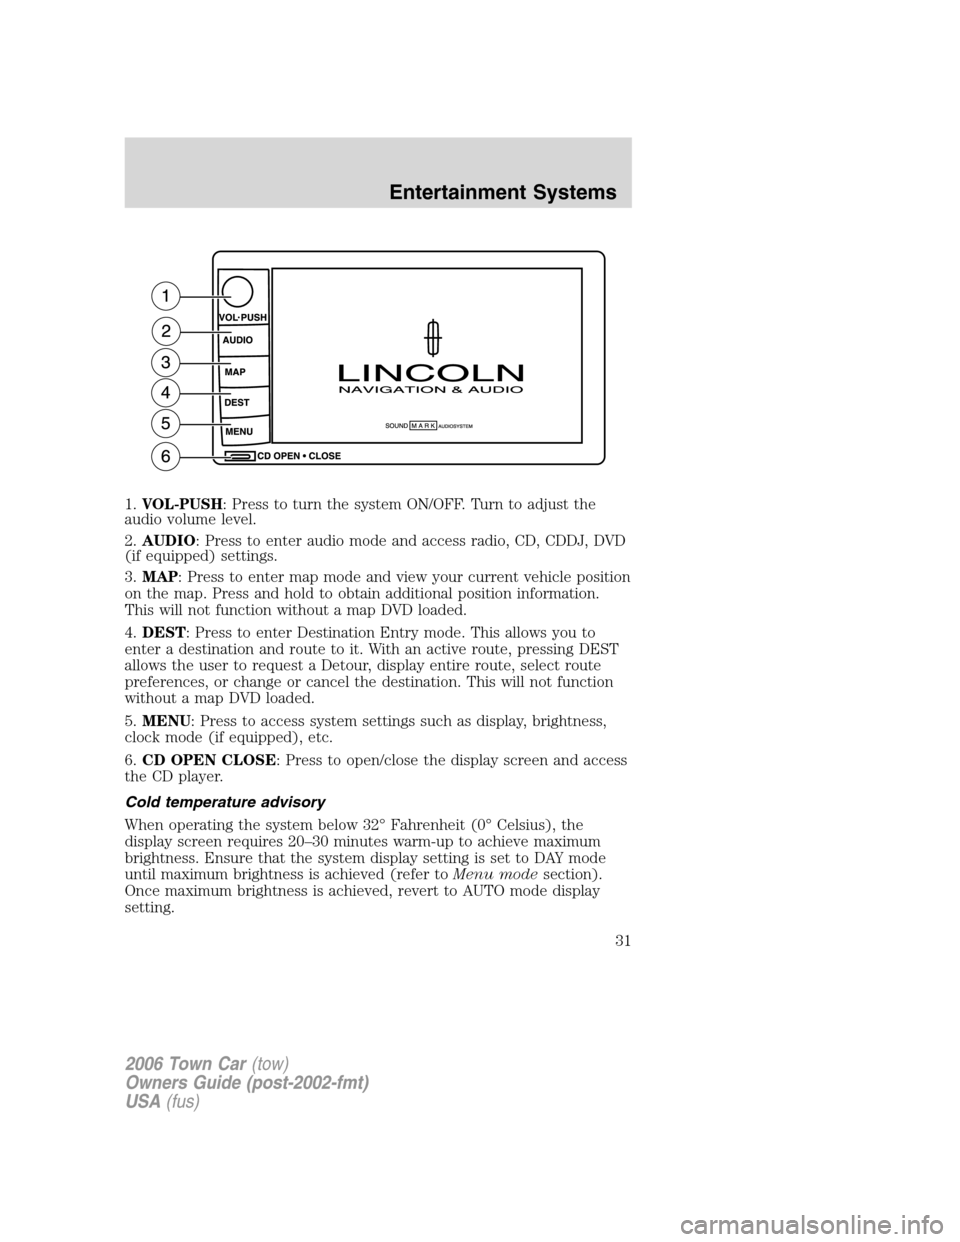 LINCOLN TOWN CAR 2006 Owners Guide 1.VOL-PUSH: Press to turn the system ON/OFF. Turn to adjust the
audio volume level.
2.AUDIO: Press to enter audio mode and access radio, CD, CDDJ, DVD
(if equipped) settings.
3.MAP: Press to enter map